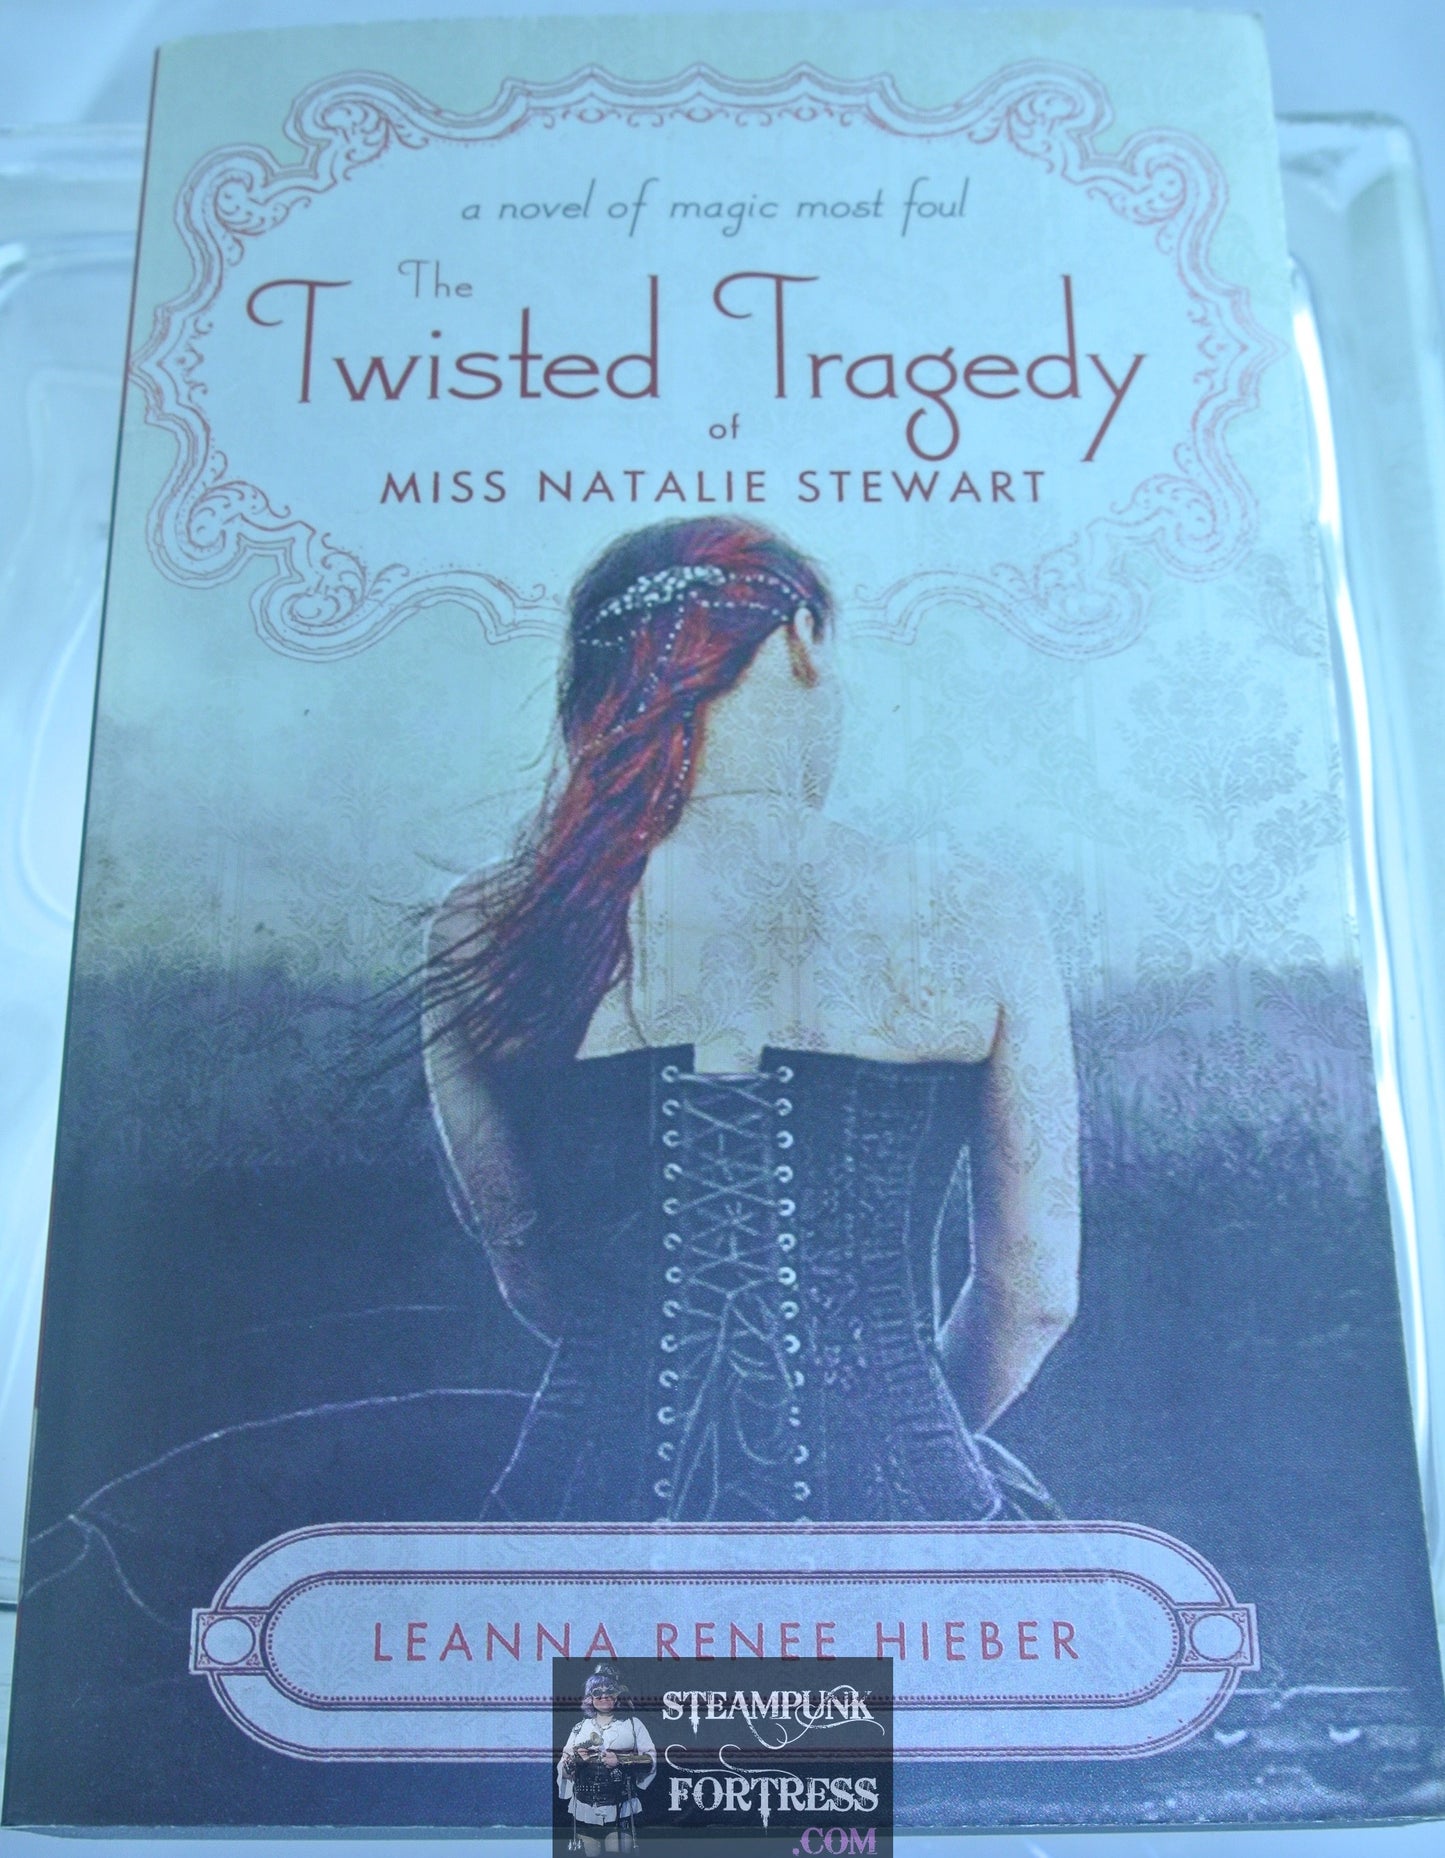 TWISTED TRAGEDY OF MISS NATALIE STEWART LEANNA RENEE HIEBER AUTOGRAPHED SIGNED BOOK PAPERBACK VERY GOOD STEAMPUNK GOTHIC MAGIC